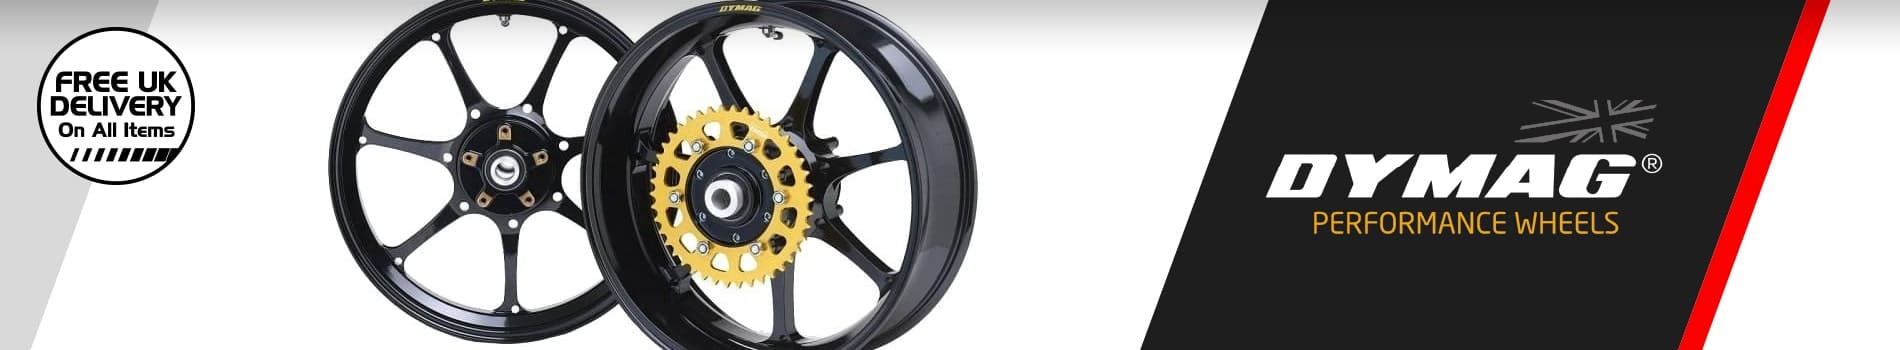 Dymag Wheels - Free UK Delivery